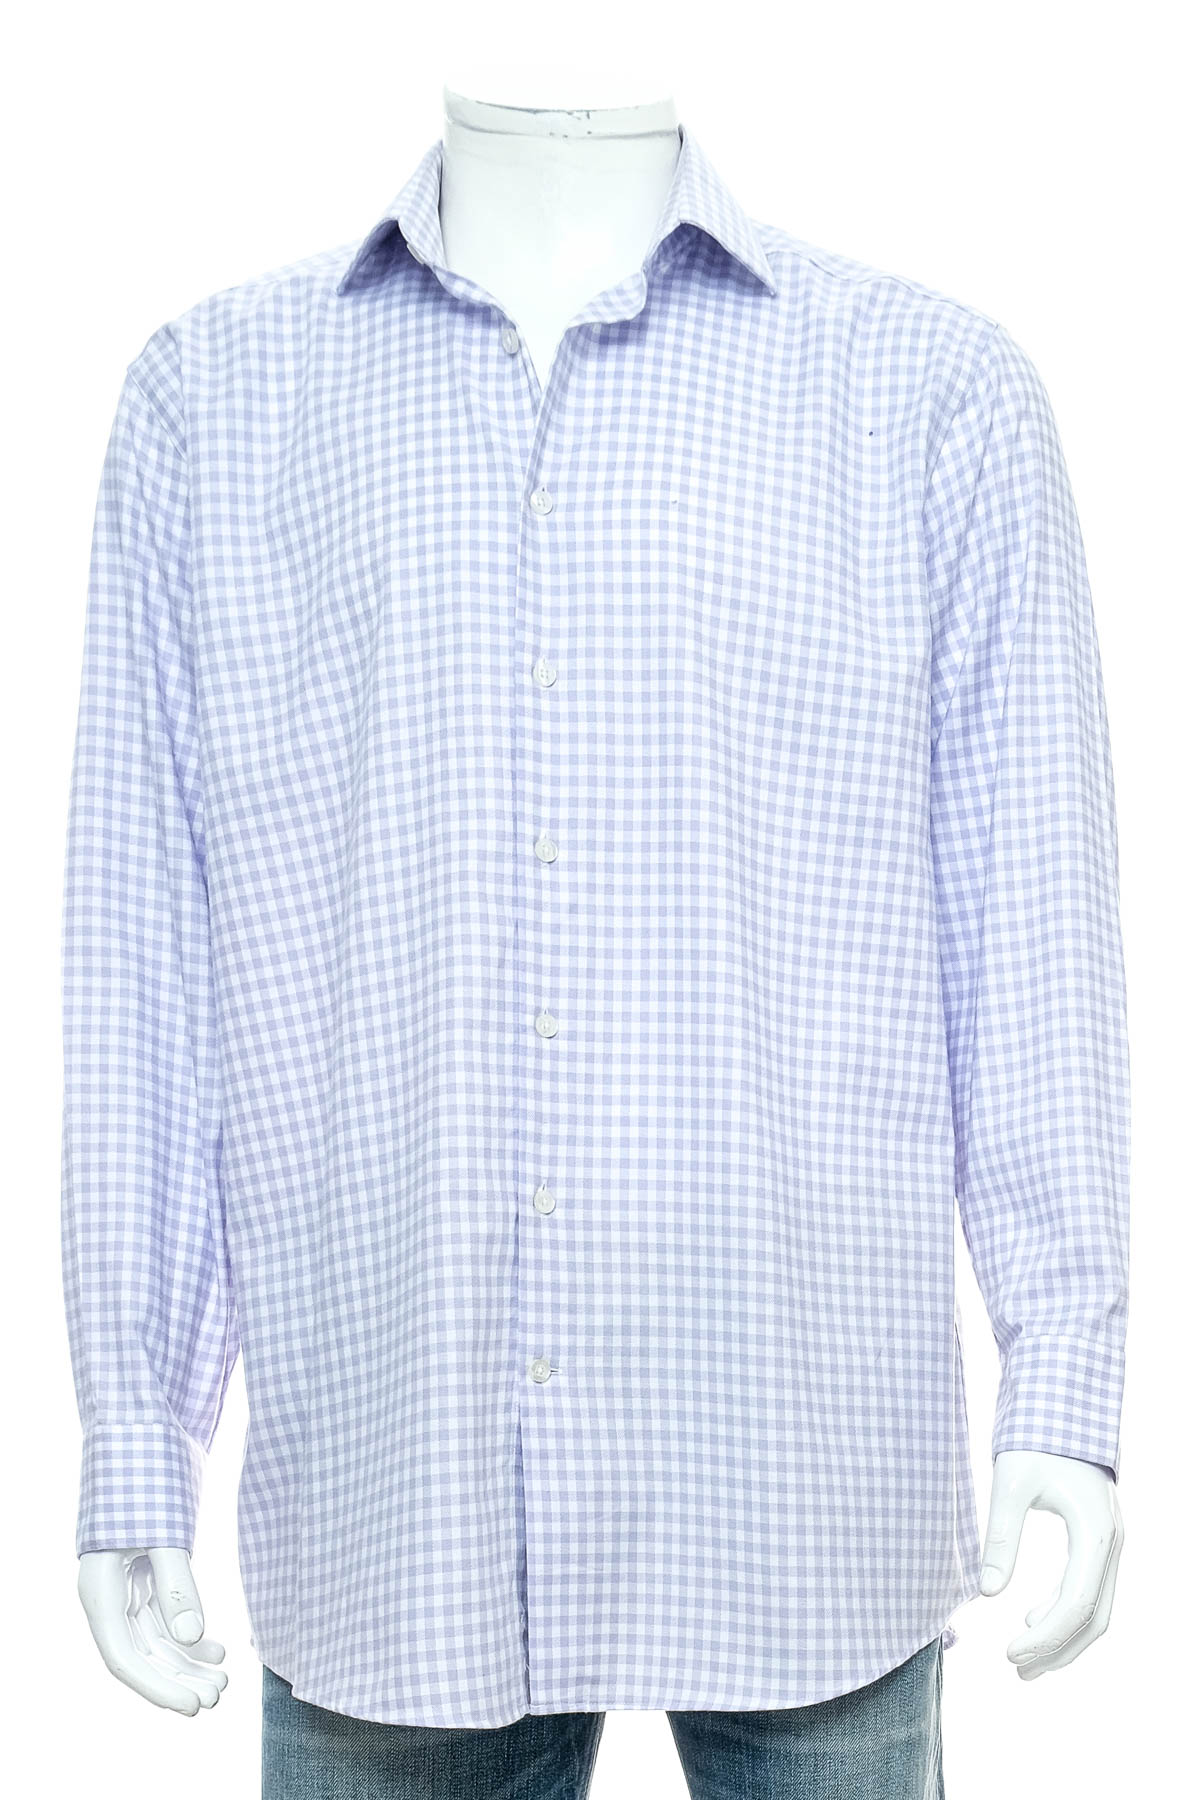 Men's shirt - COLLECTION by MICHAEL STRAHAN - 0